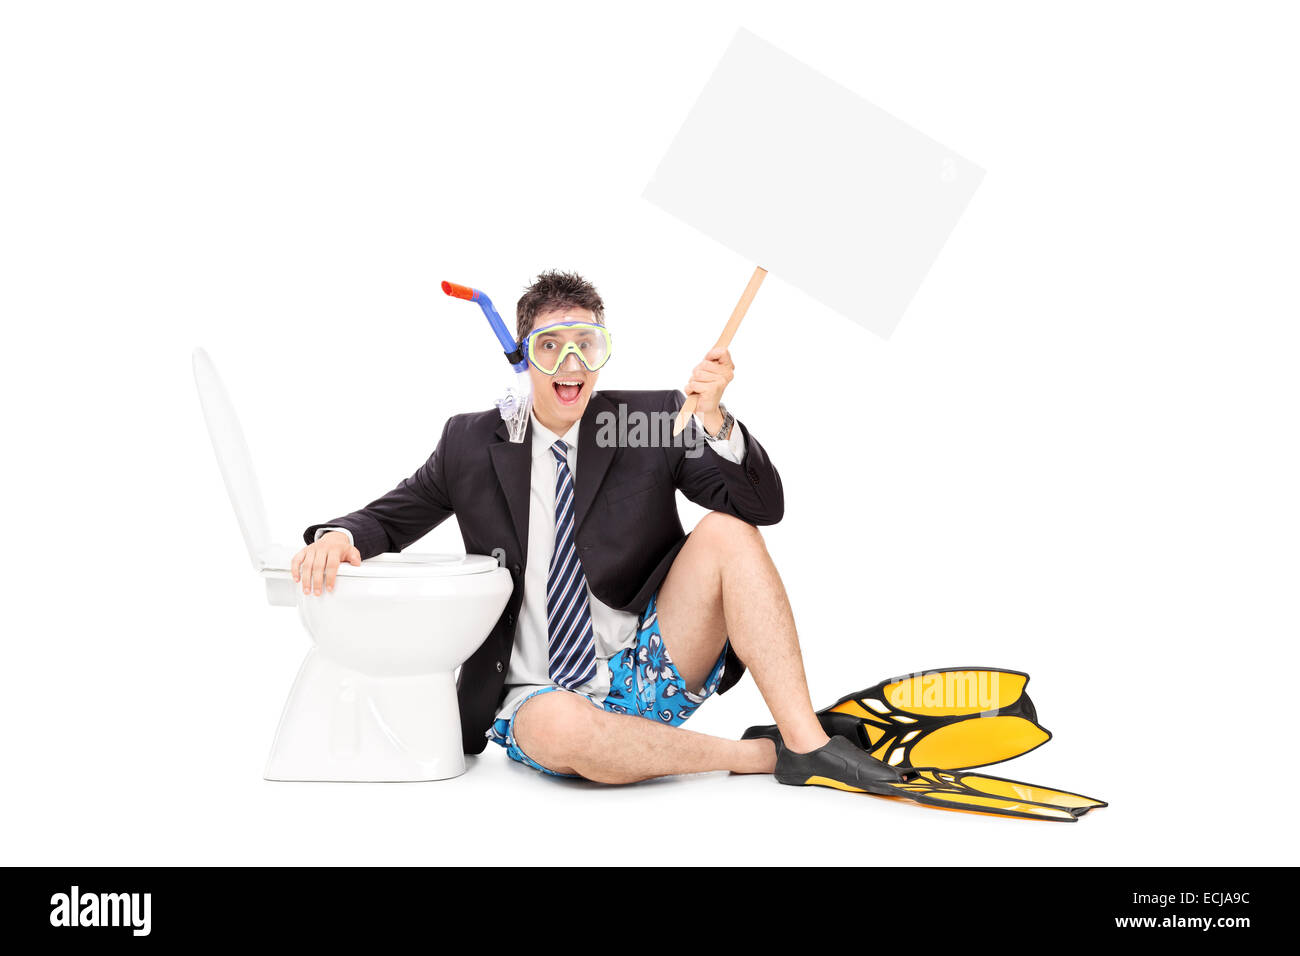 Man with snorkel holding a banner by a toilet isolated on white background Stock Photo